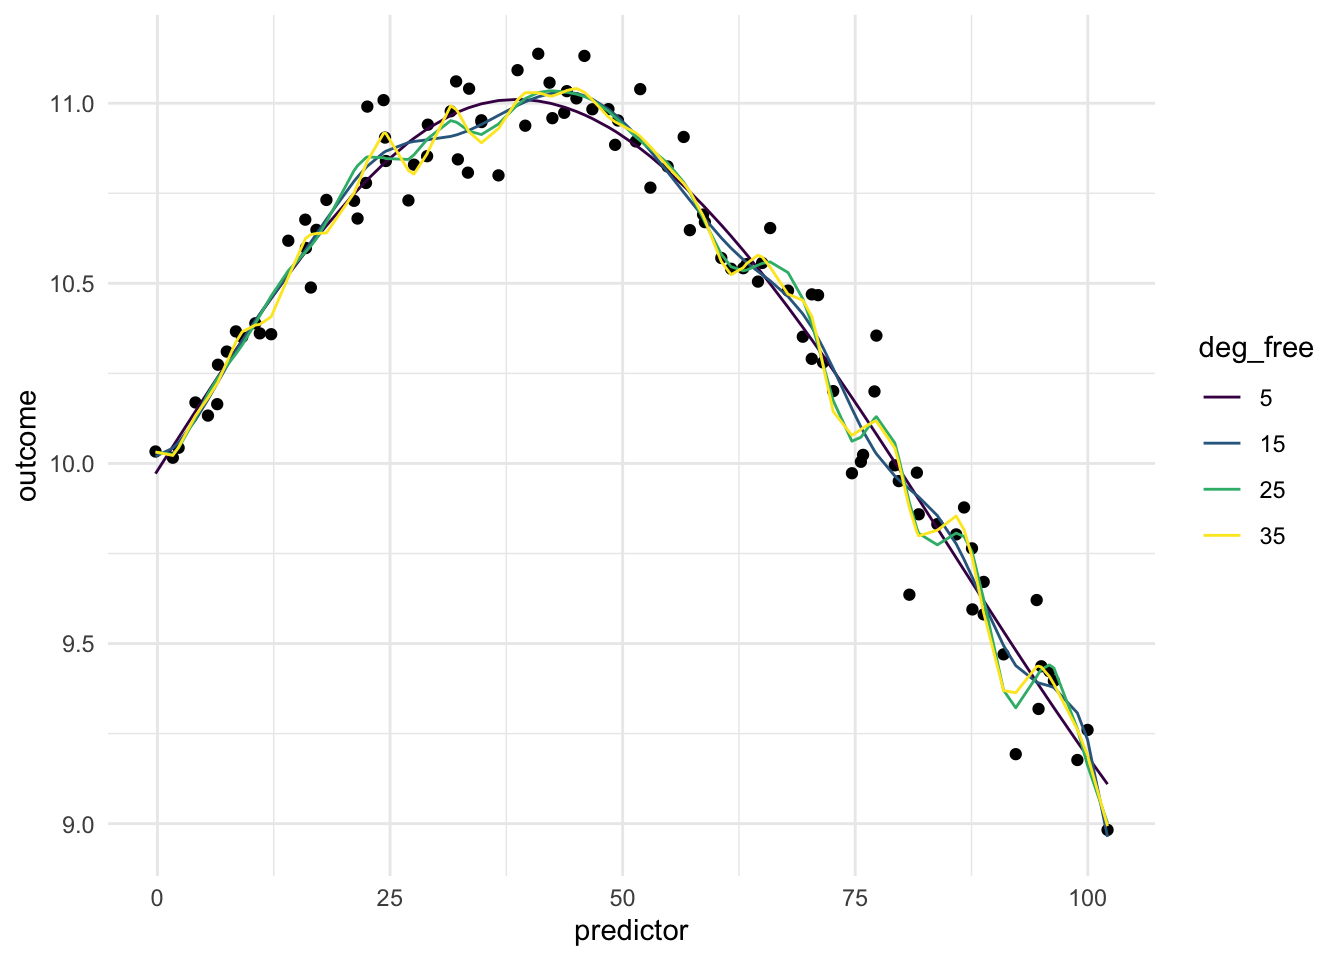 Scatter chart. Predictor along the x-axis and outcome along the y-axis. The data has some wiggliness to it, but it follows a curve. You would not be able to fit a straight line to this data. 4 spline fits are plotted to fit the data. deg_free = 5 appears to fit well without overfitting, the rest are overfitting the data.